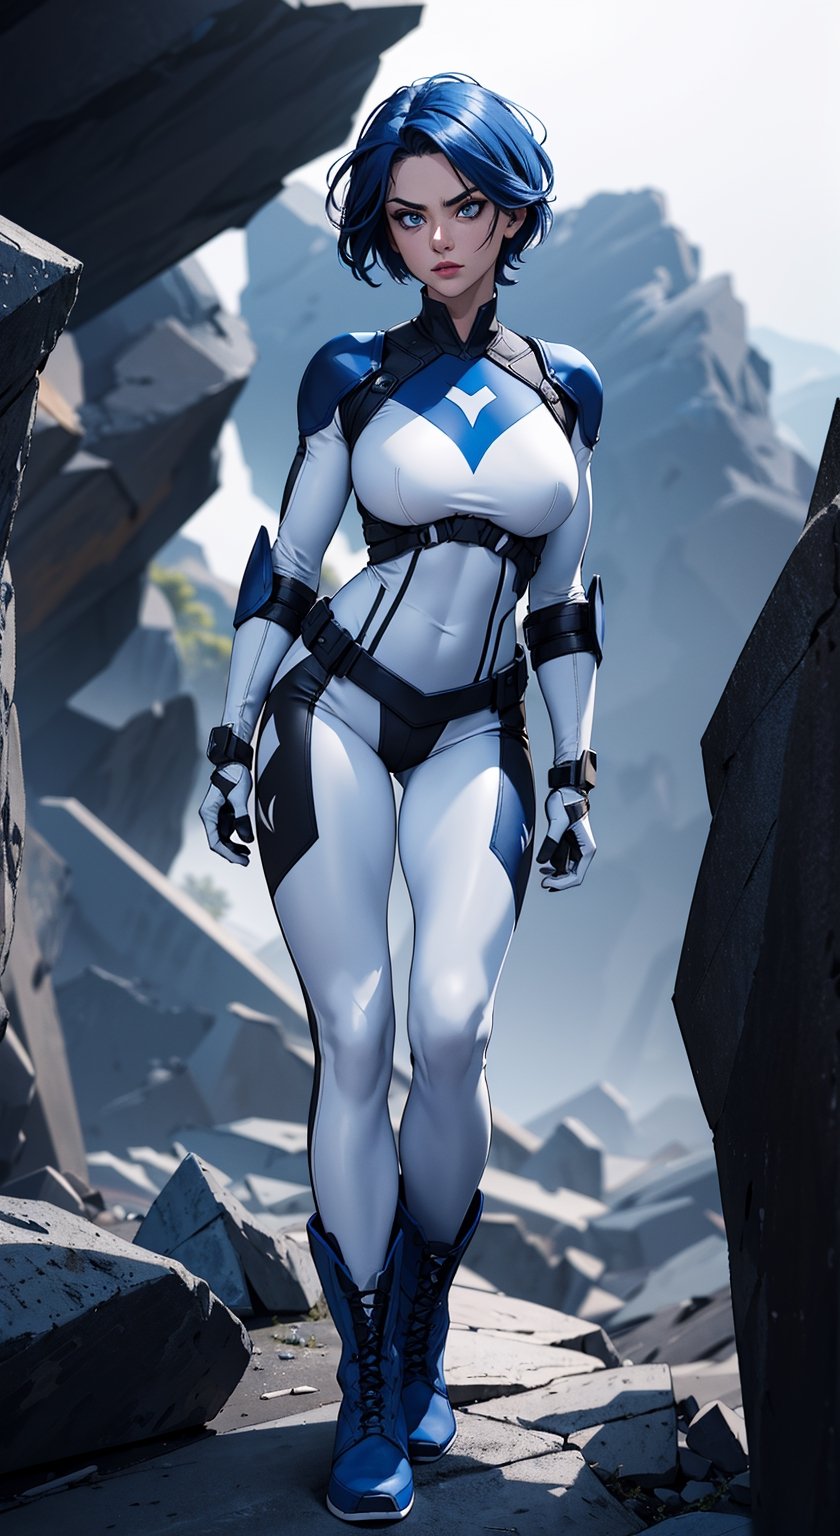 masterpiece,  best quality,  aggressive looking face, big eyes, outdoors, very muscular woman, hands are well shown, standing, super-hero style, full metal body armour in white colour, leggings, (white leather pointed angle boots),  Dramatic lighting, Night time,  Rugged and rocky terrain background, blue eyes, blue short hair, High detailed full body, Head to feet